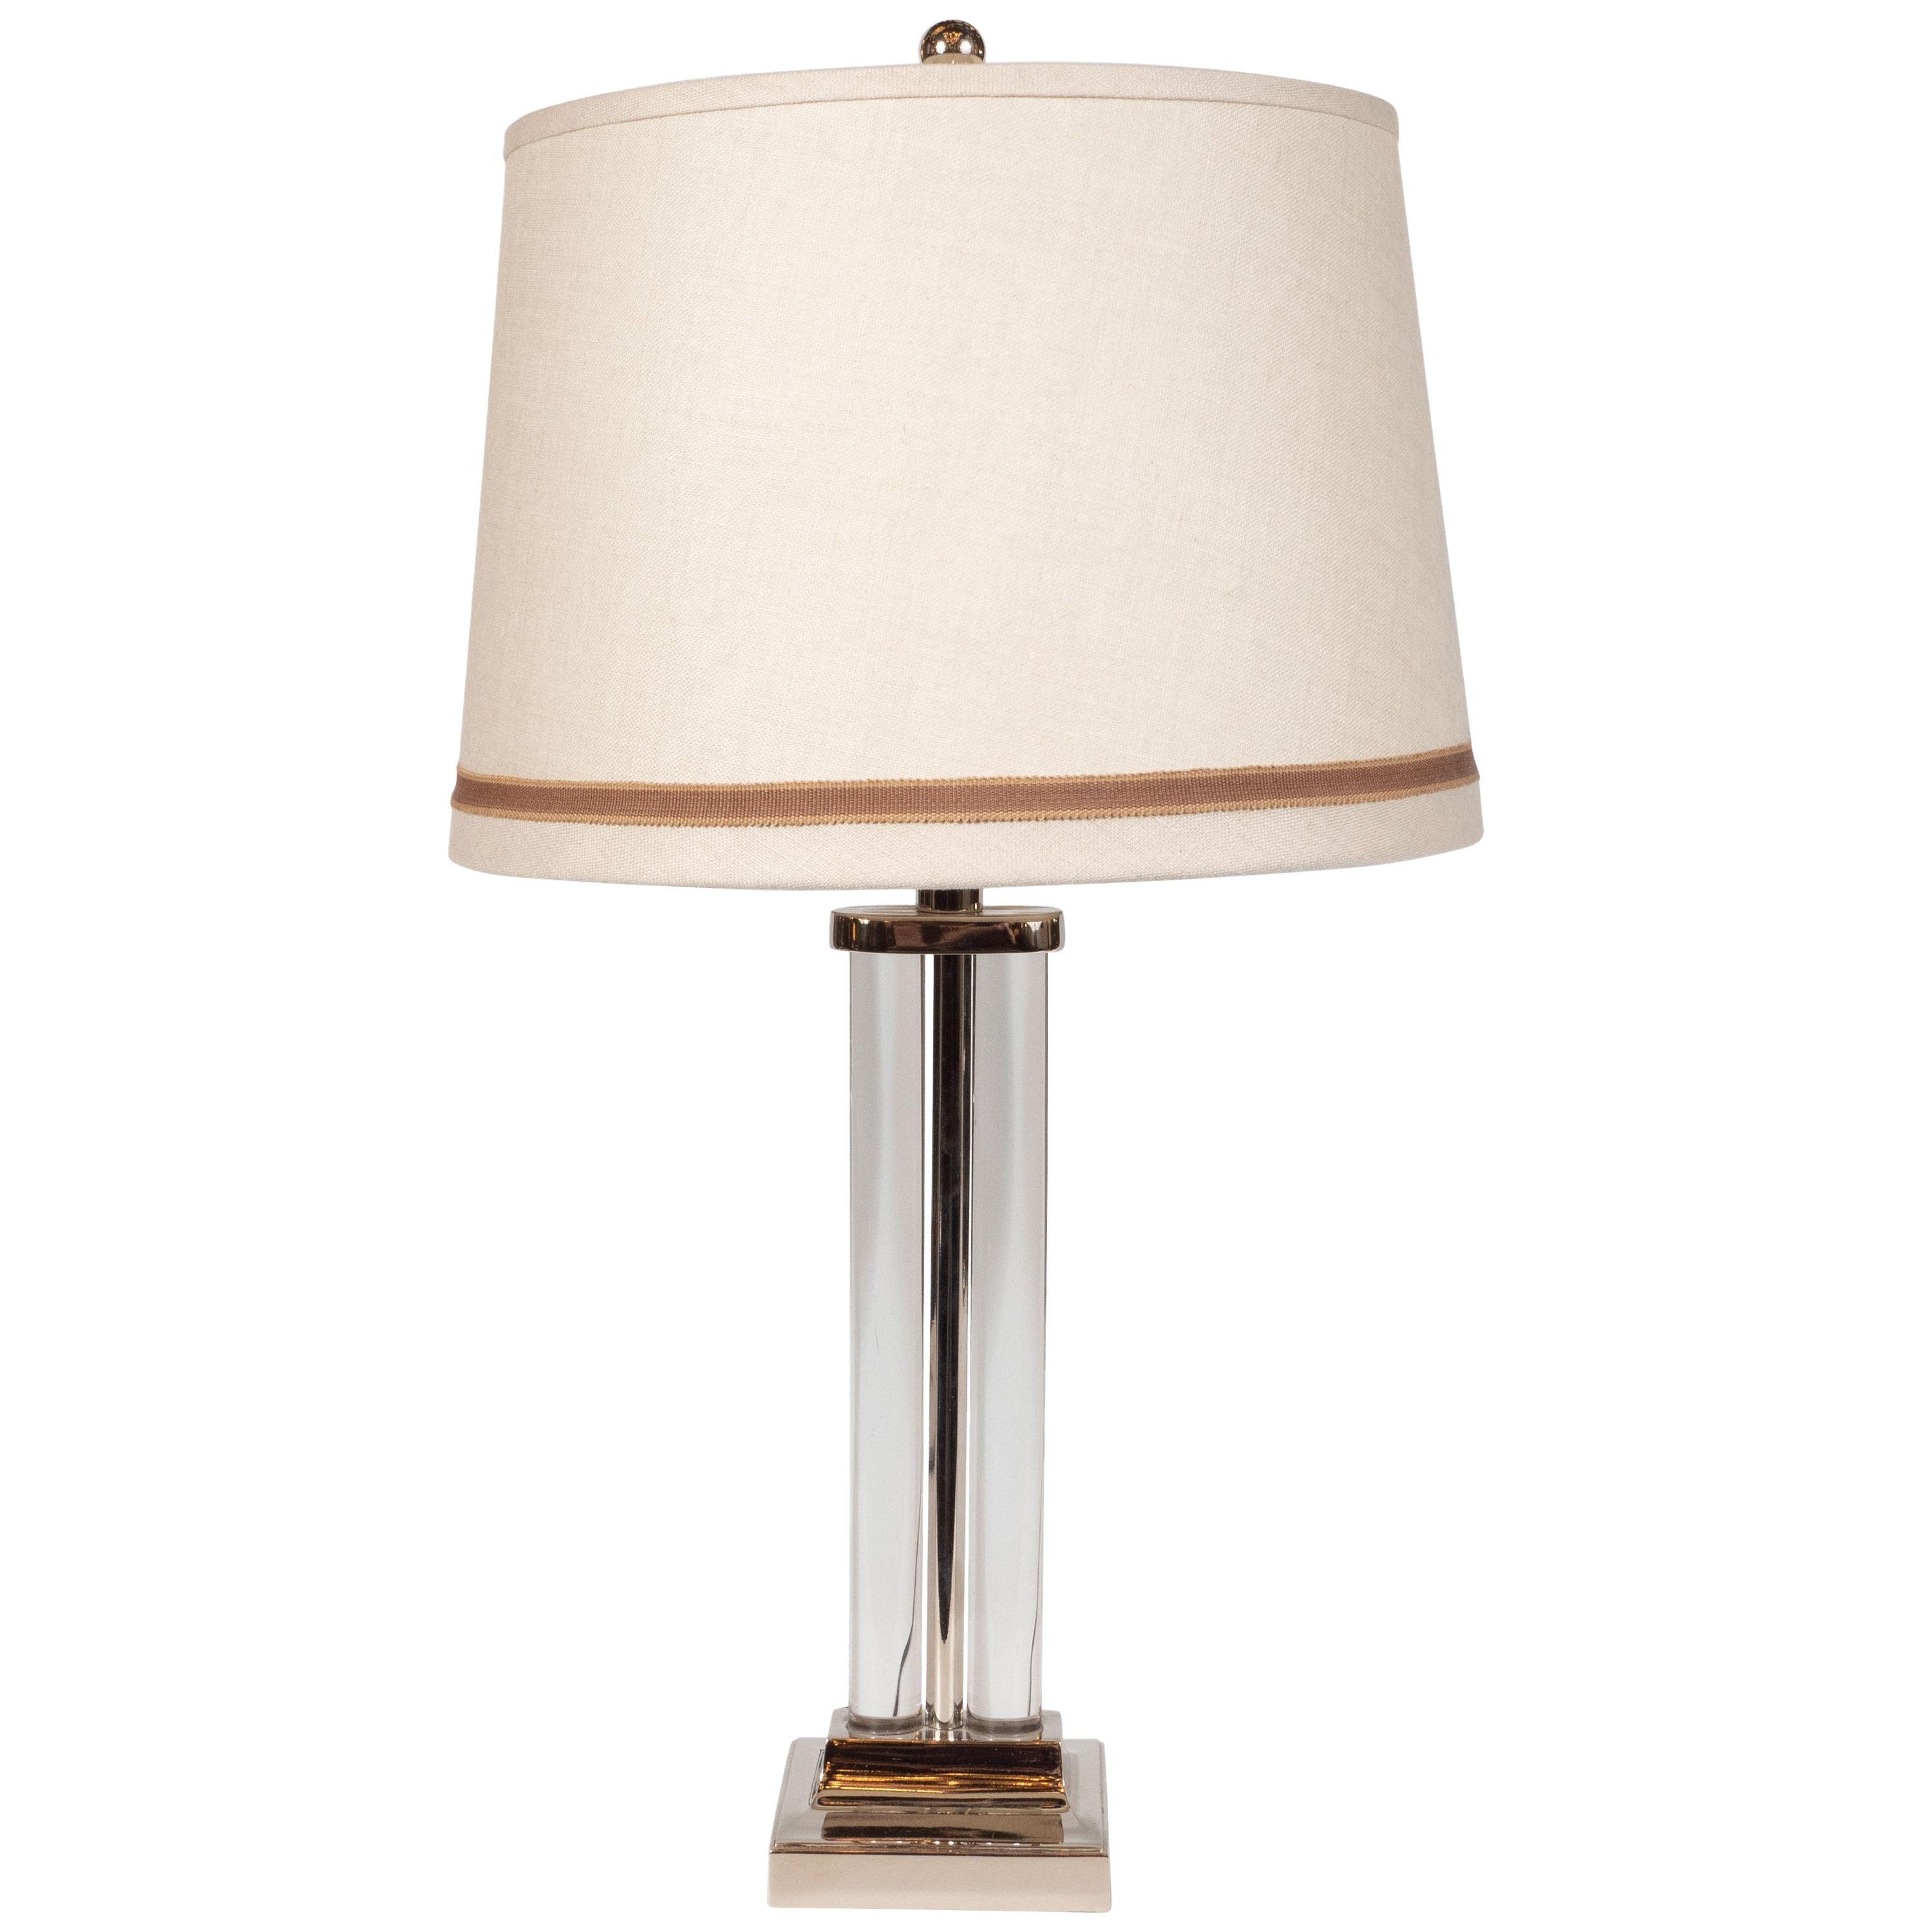 Art Deco Glass and Nickel Table Lamp by Gilbert Rohde for MSLC